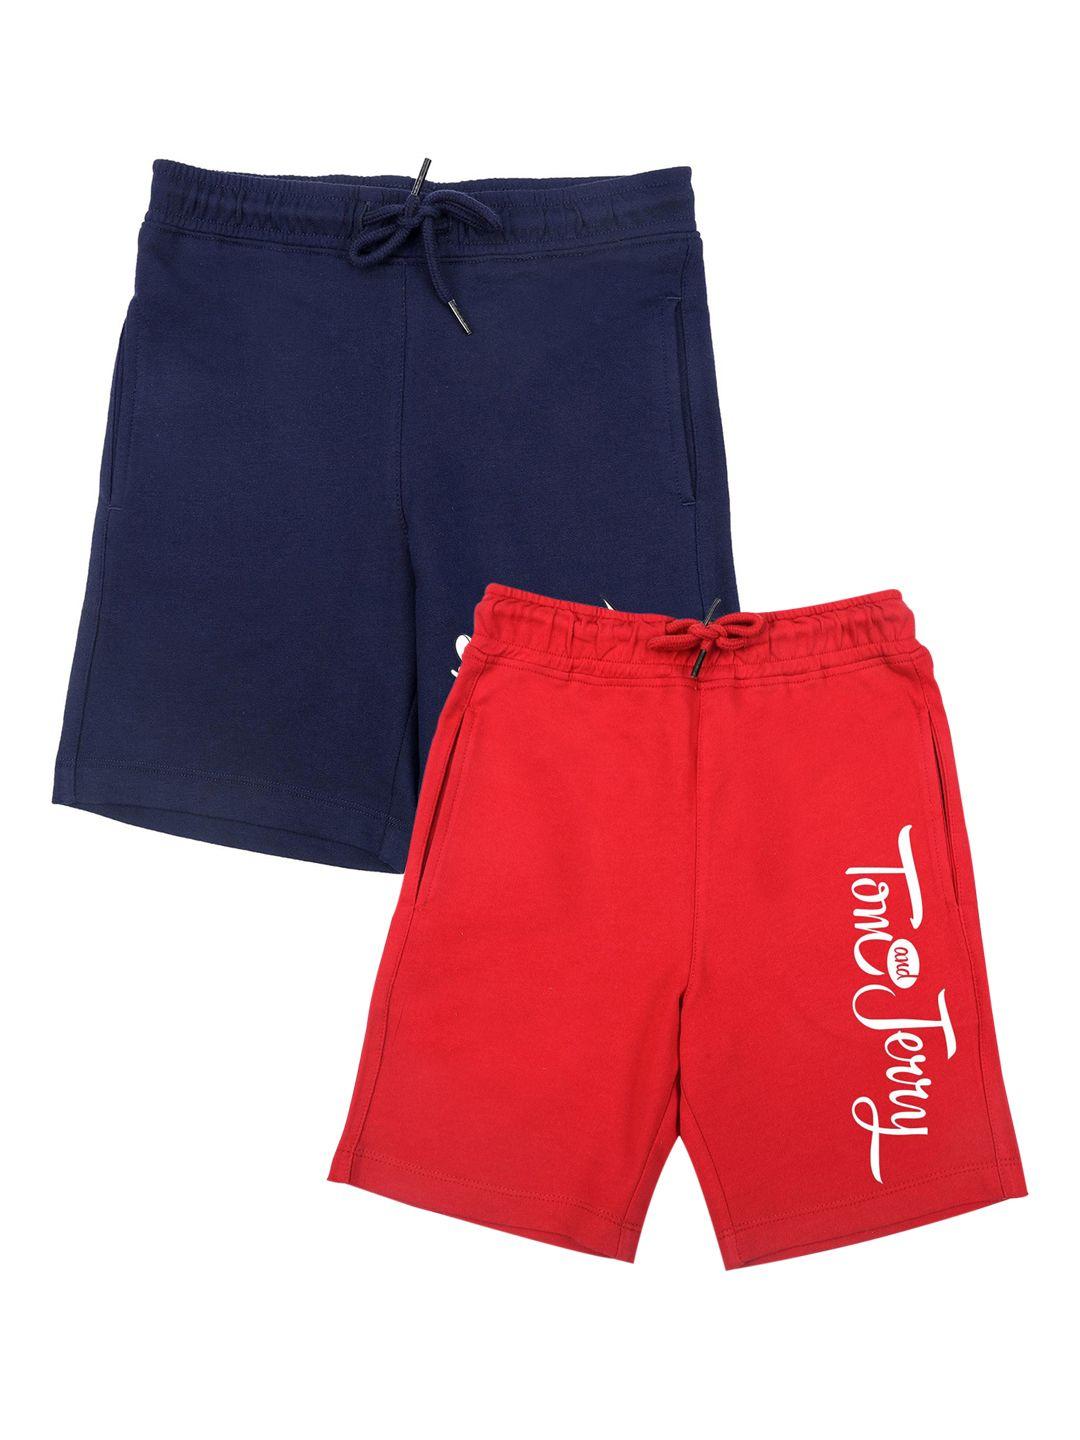 tom & jerry by wear your mind boys navy blue printed tom & jerry shorts